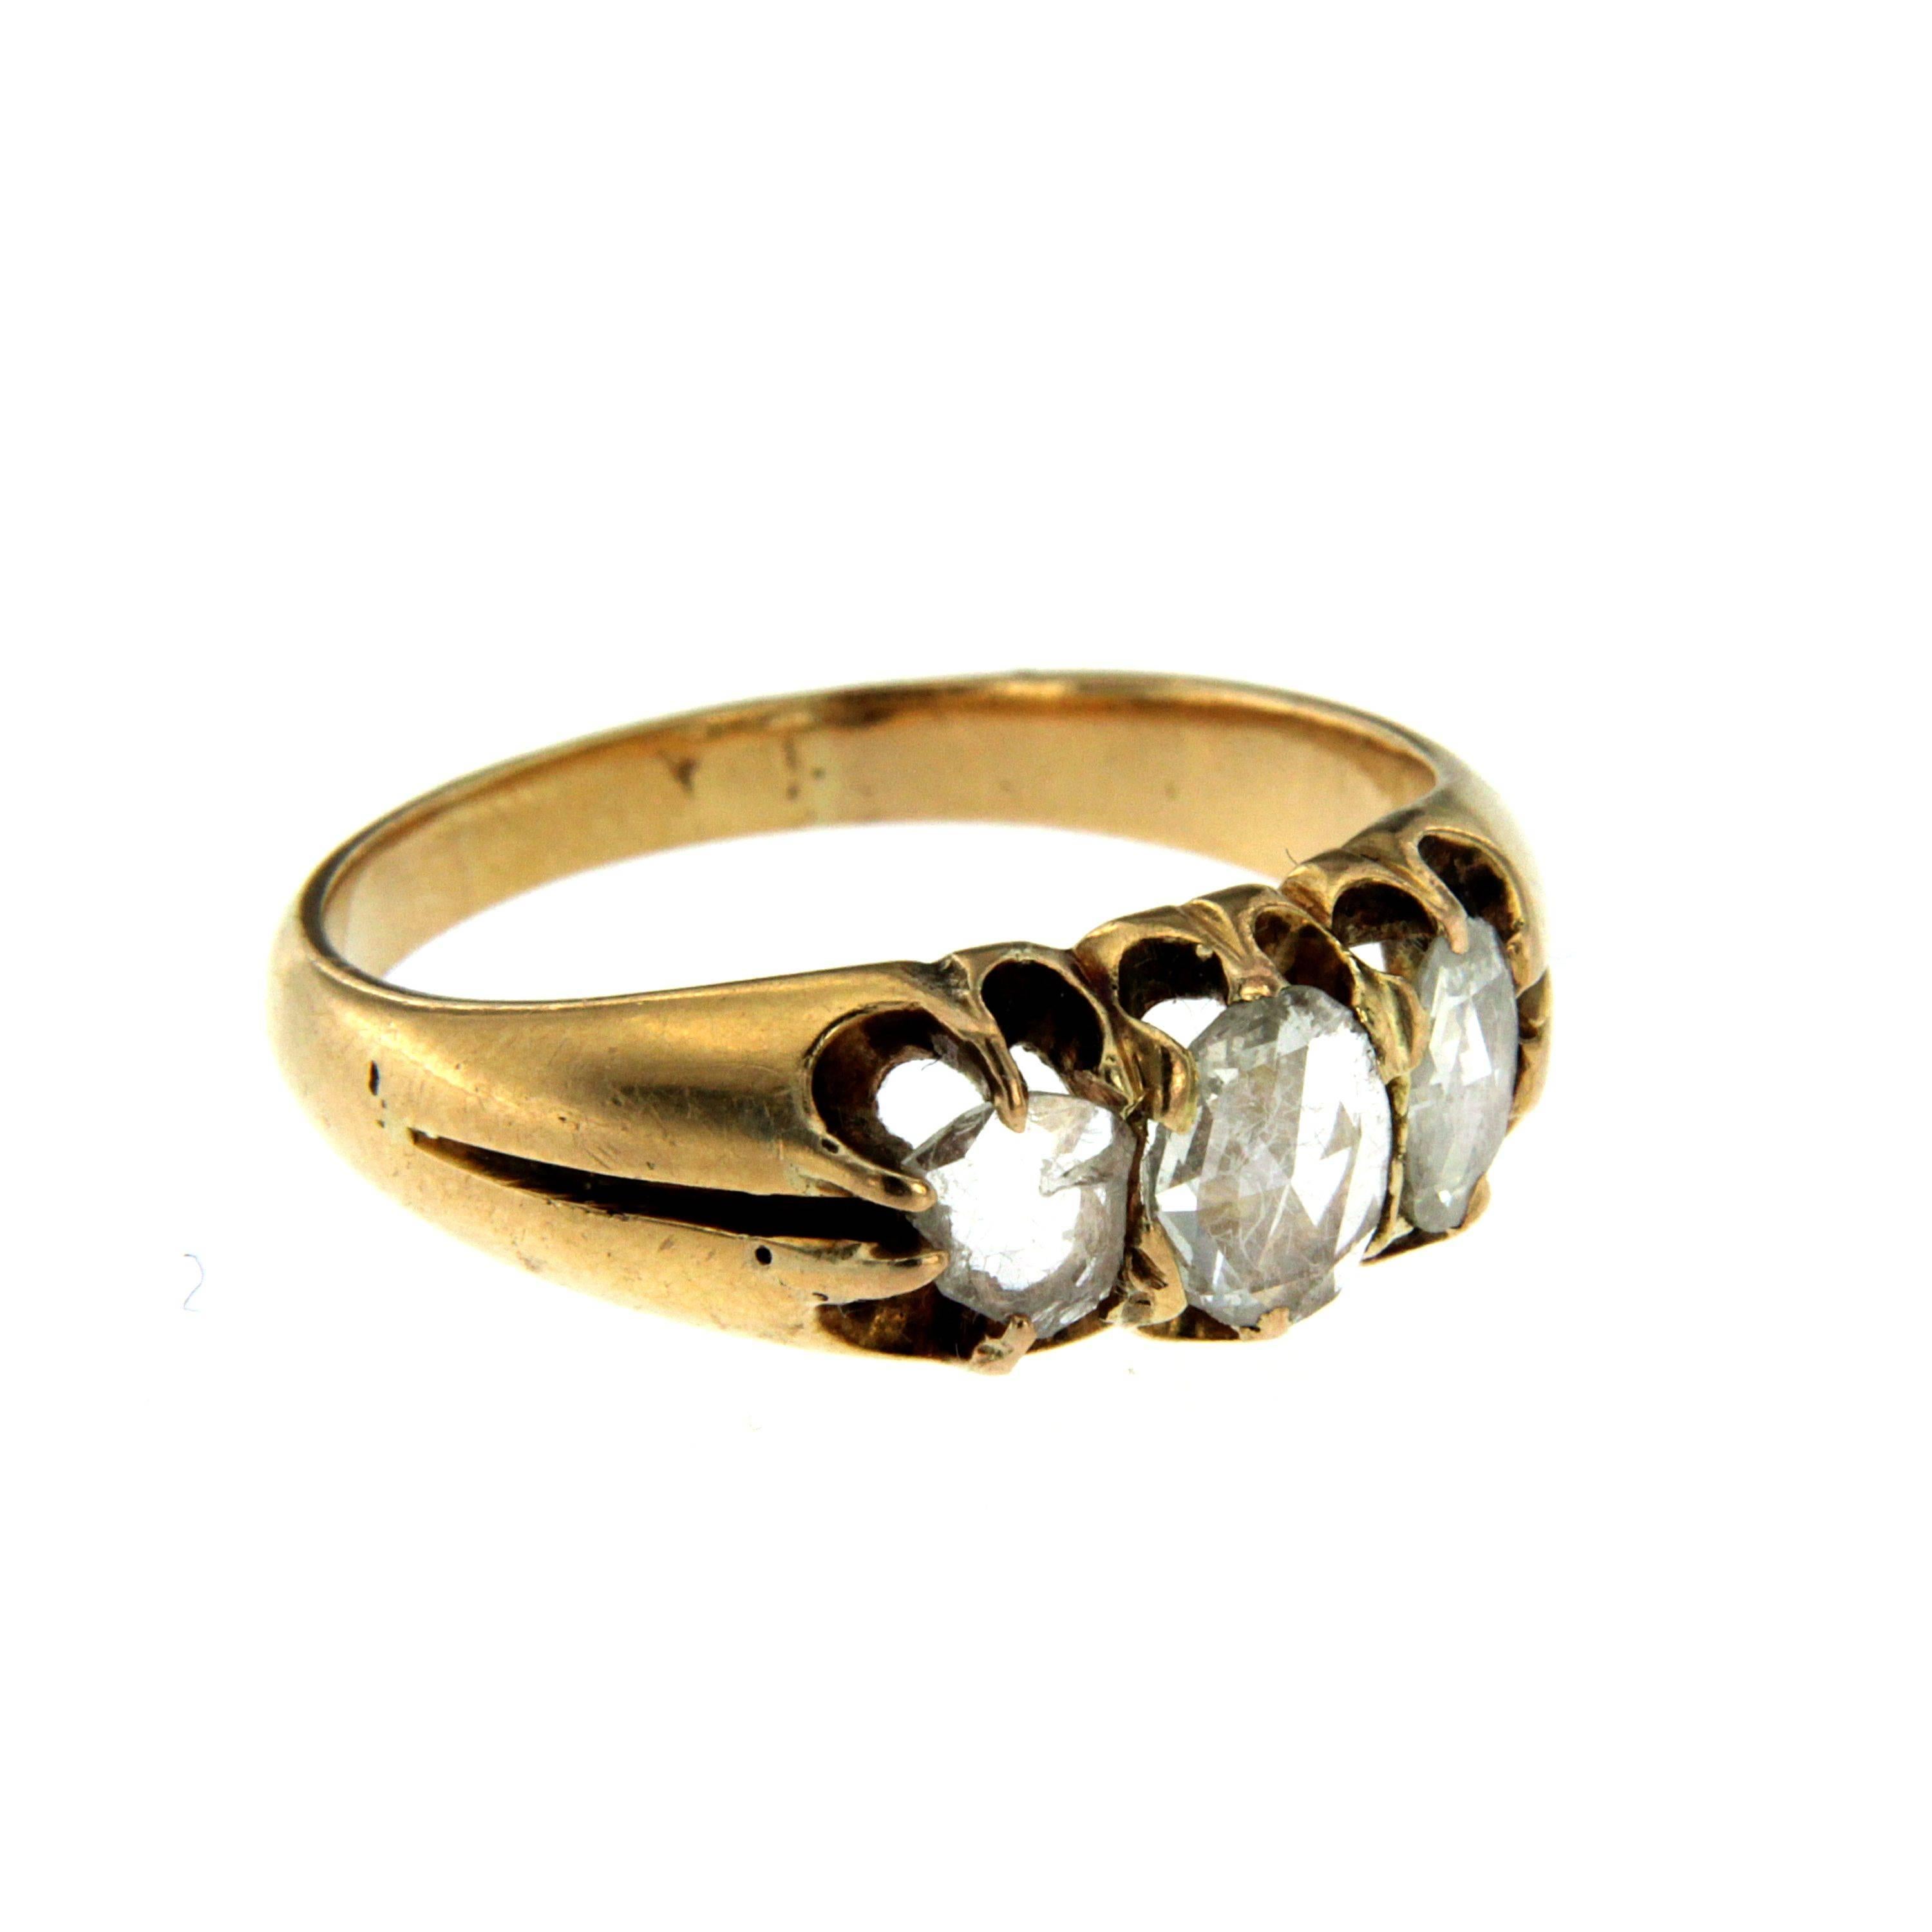 A gorgeous Georgian three stone ring modelled in 18k yellow Gold and set with 0.50 ct rose cut diamonds. Very fine claws hold the stones in an open gallery. Circa 1820

CONDITION: Pre-Owned - Excellent
METAL: 18k Yellow Gold
GEM STONE: Diamond 0.50